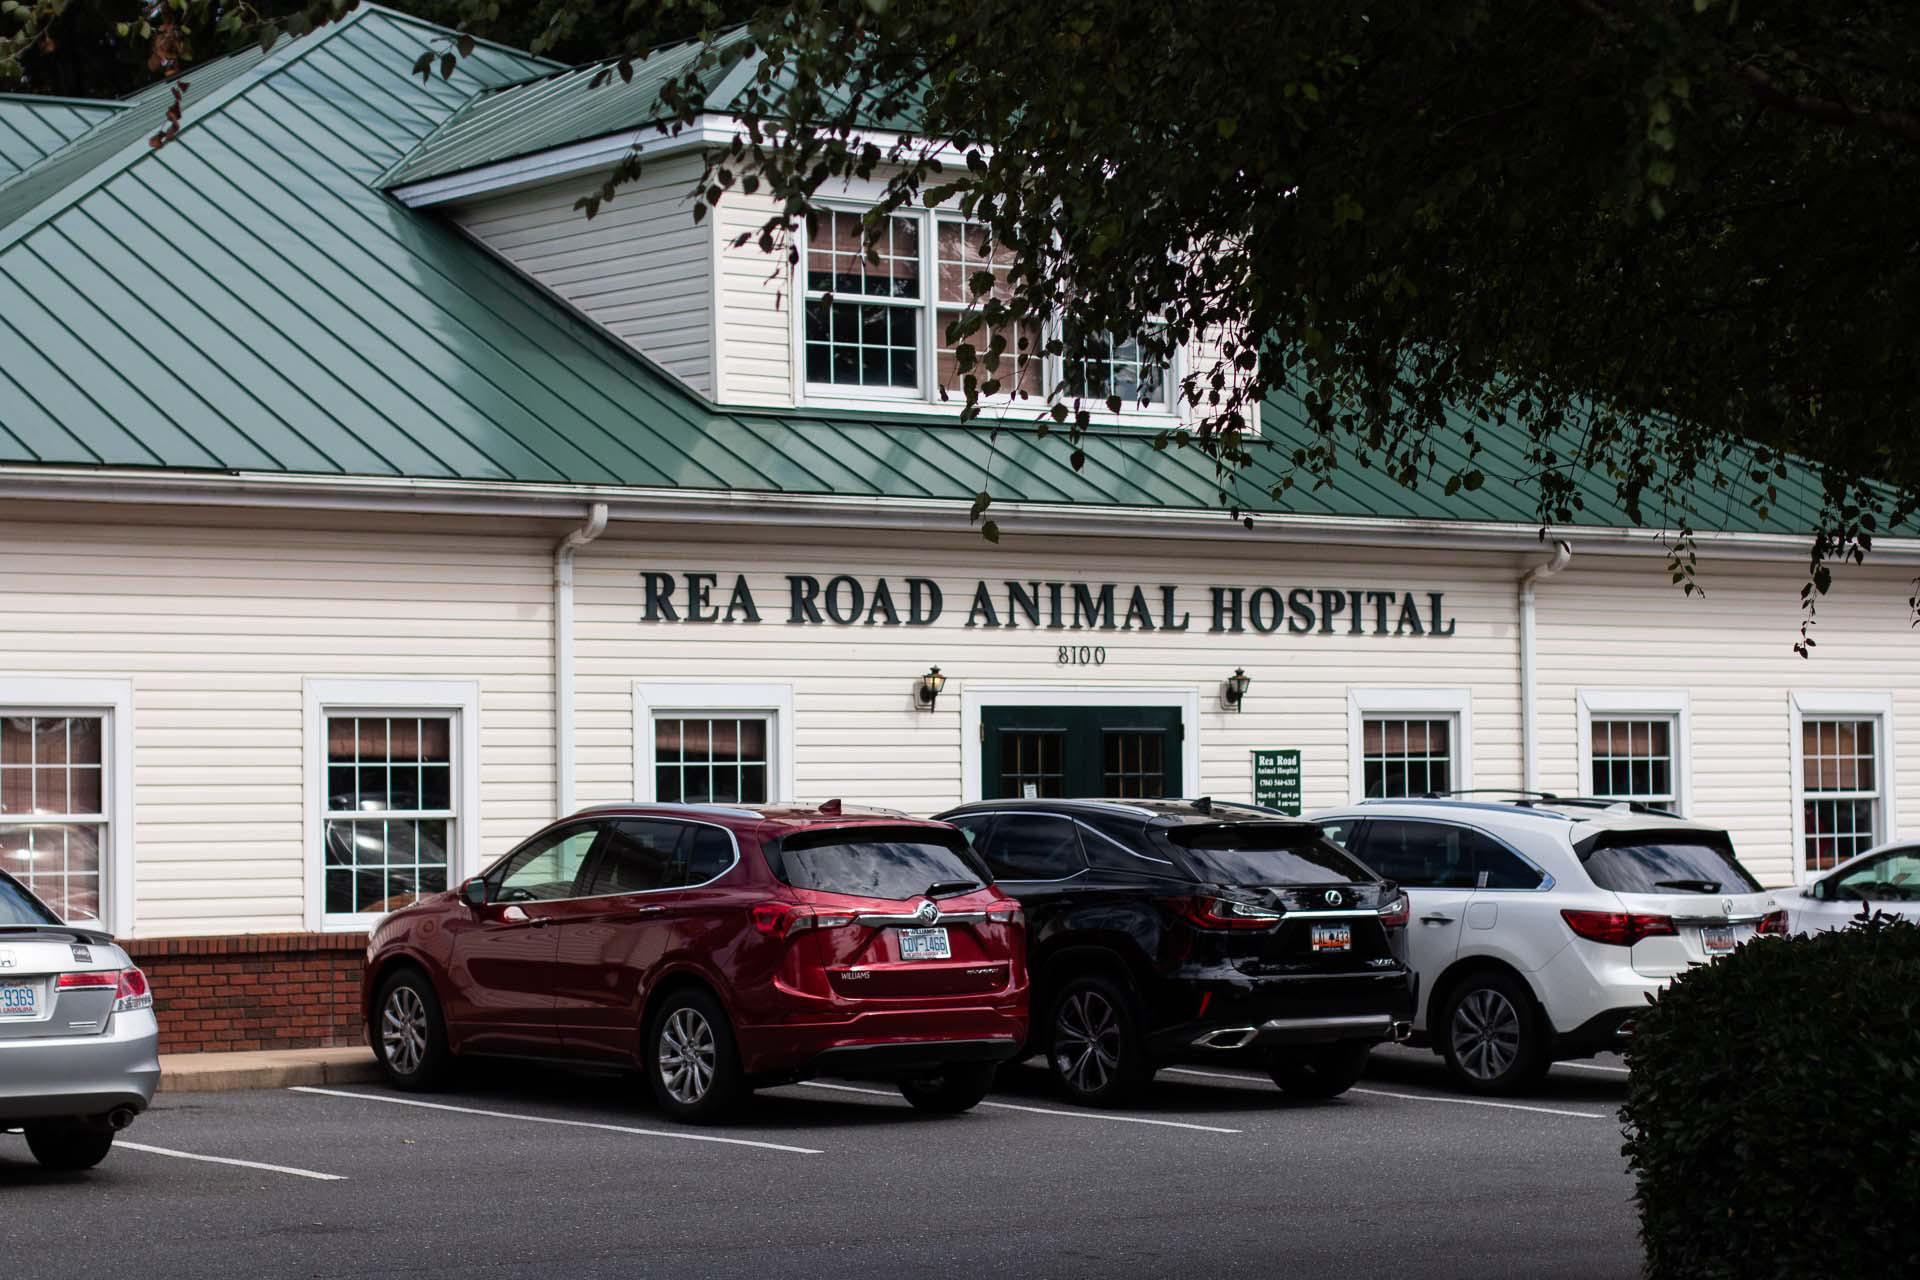 At Rea Road Animal Hospital, we strive to strengthen the special bond between our patients and their owners through a warm bedside manner. Patients of Rea Road Animal Hospital can expect to be treated with warmth and clarity so that both animals and humans feel welcomed at our practice.